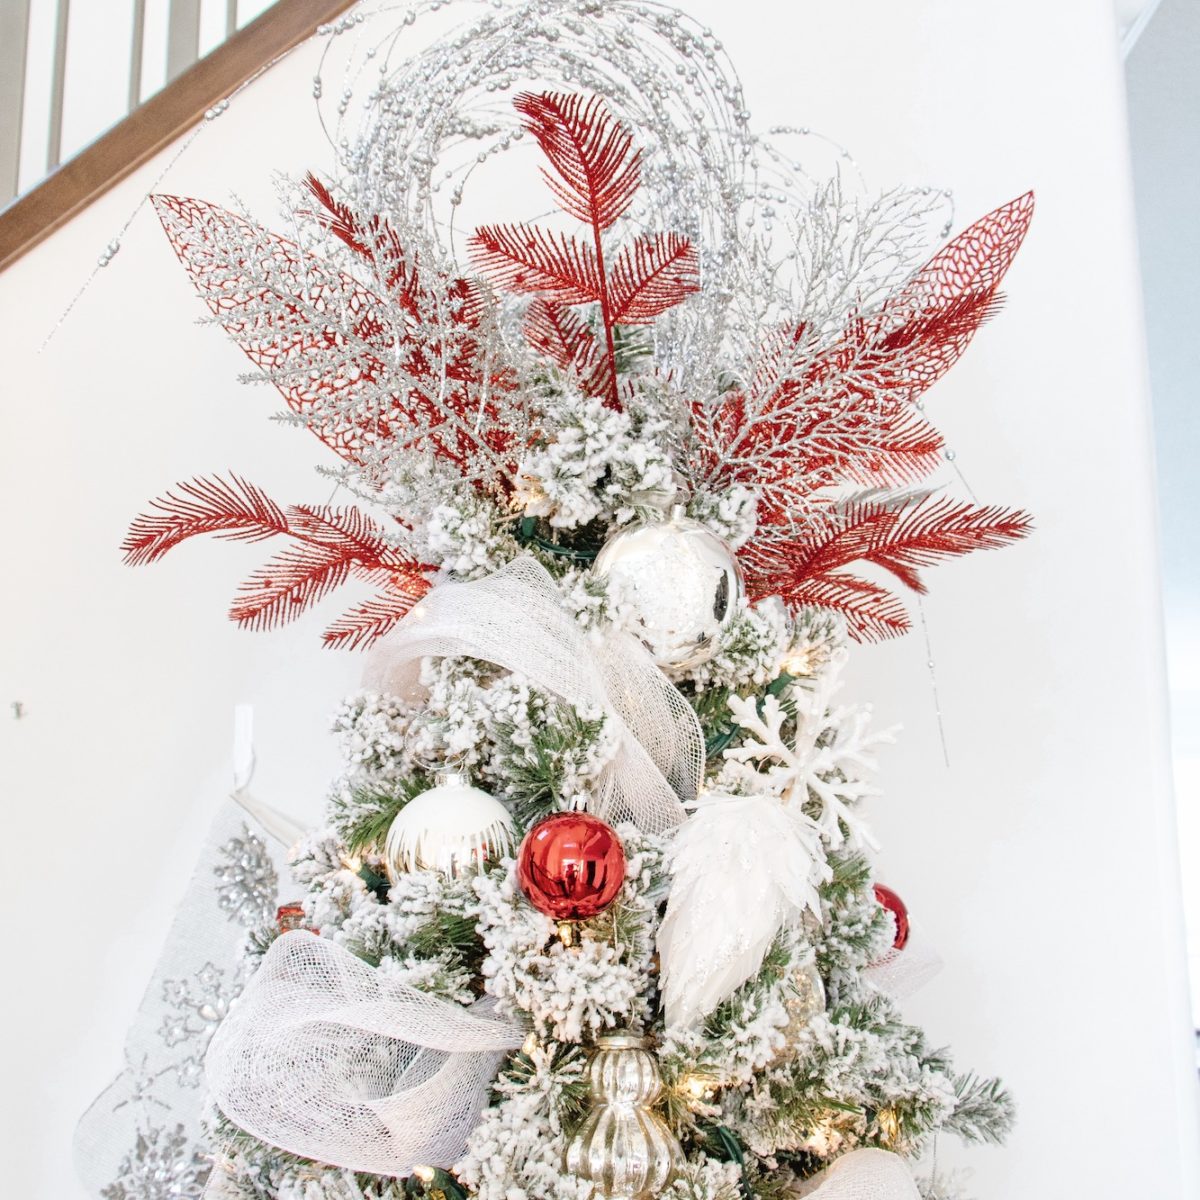 https://chandeliersandchampagne.com/wp-content/uploads/2020/11/White-and-red-Christmas-tree-topper-1200x1200-cropped.jpg